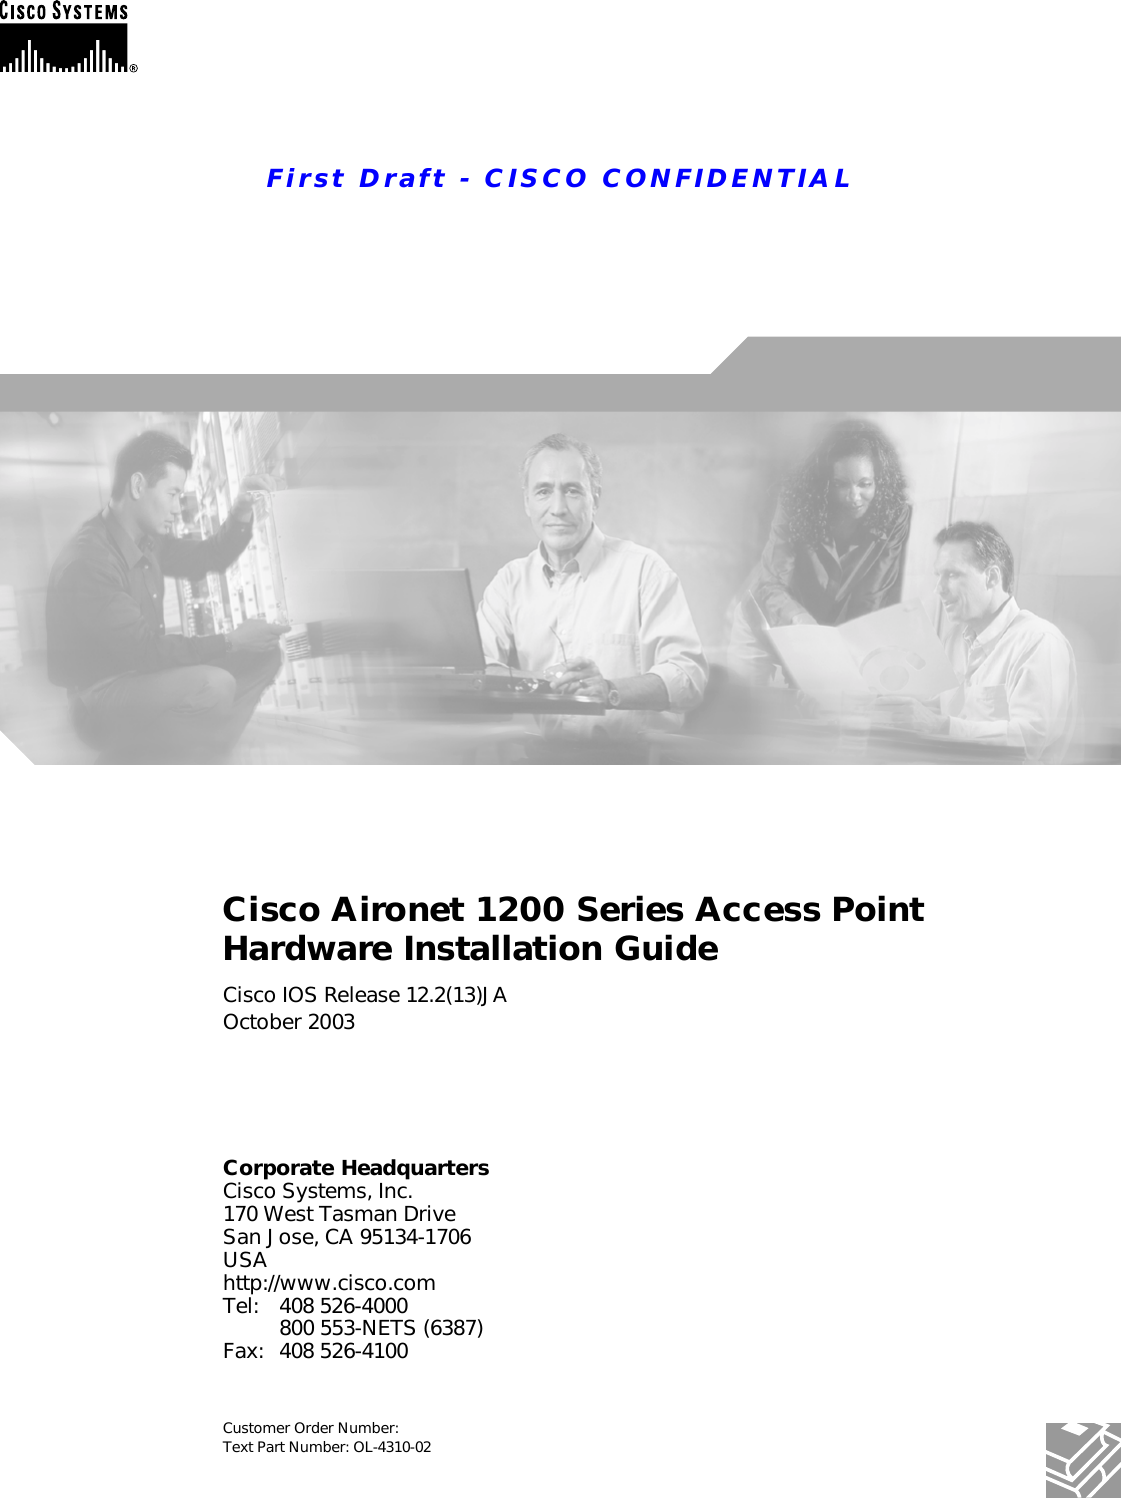 First Draft - CISCO CONFIDENTIALCorporate HeadquartersCisco Systems, Inc.170 West Tasman DriveSan Jose, CA 95134-1706 USAhttp://www.cisco.comTel: 408 526-4000800 553-NETS (6387)Fax: 408 526-4100Cisco Aironet 1200 Series Access Point Hardware Installation Guide Cisco IOS Release 12.2(13)JAOctober 2003Customer Order Number: Text Part Number: OL-4310-02